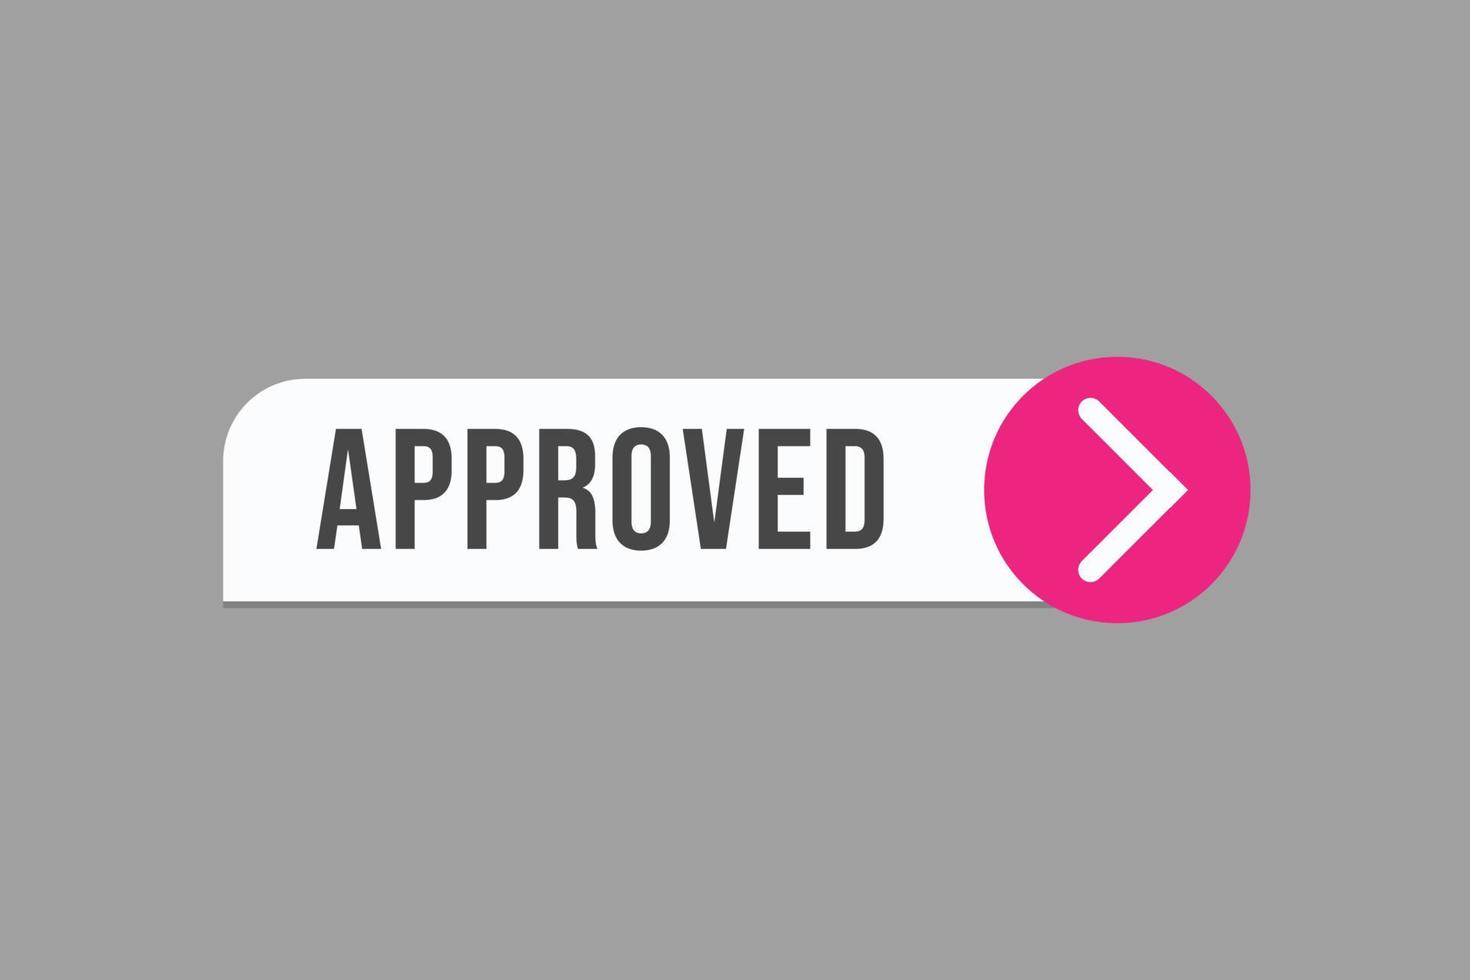 approved button vectors. sign label speech bubble approved vector